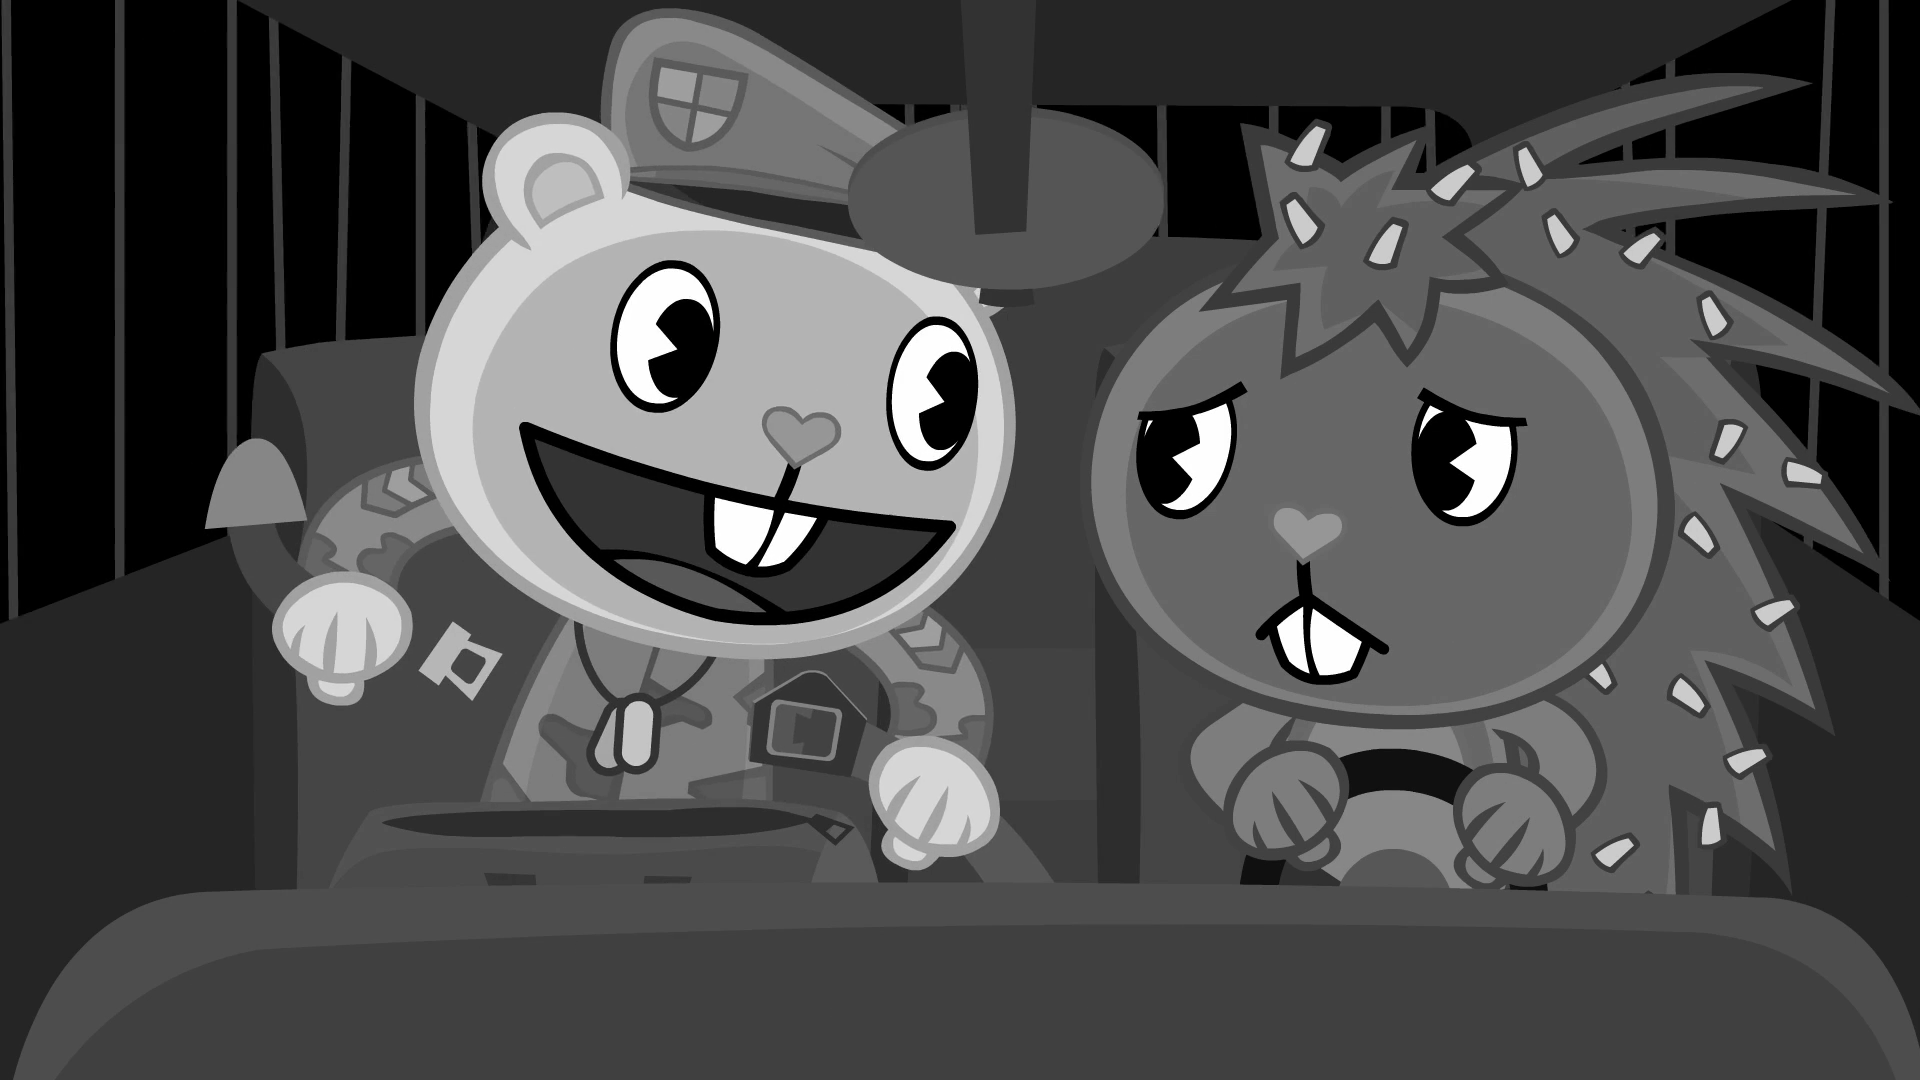 https://static.wikia.nocookie.net/happytreefriends/images/c/c8/S3E10_SOIHEARDYOULIKESEATBELTS.PNG/revision/latest?cb=20160315081654